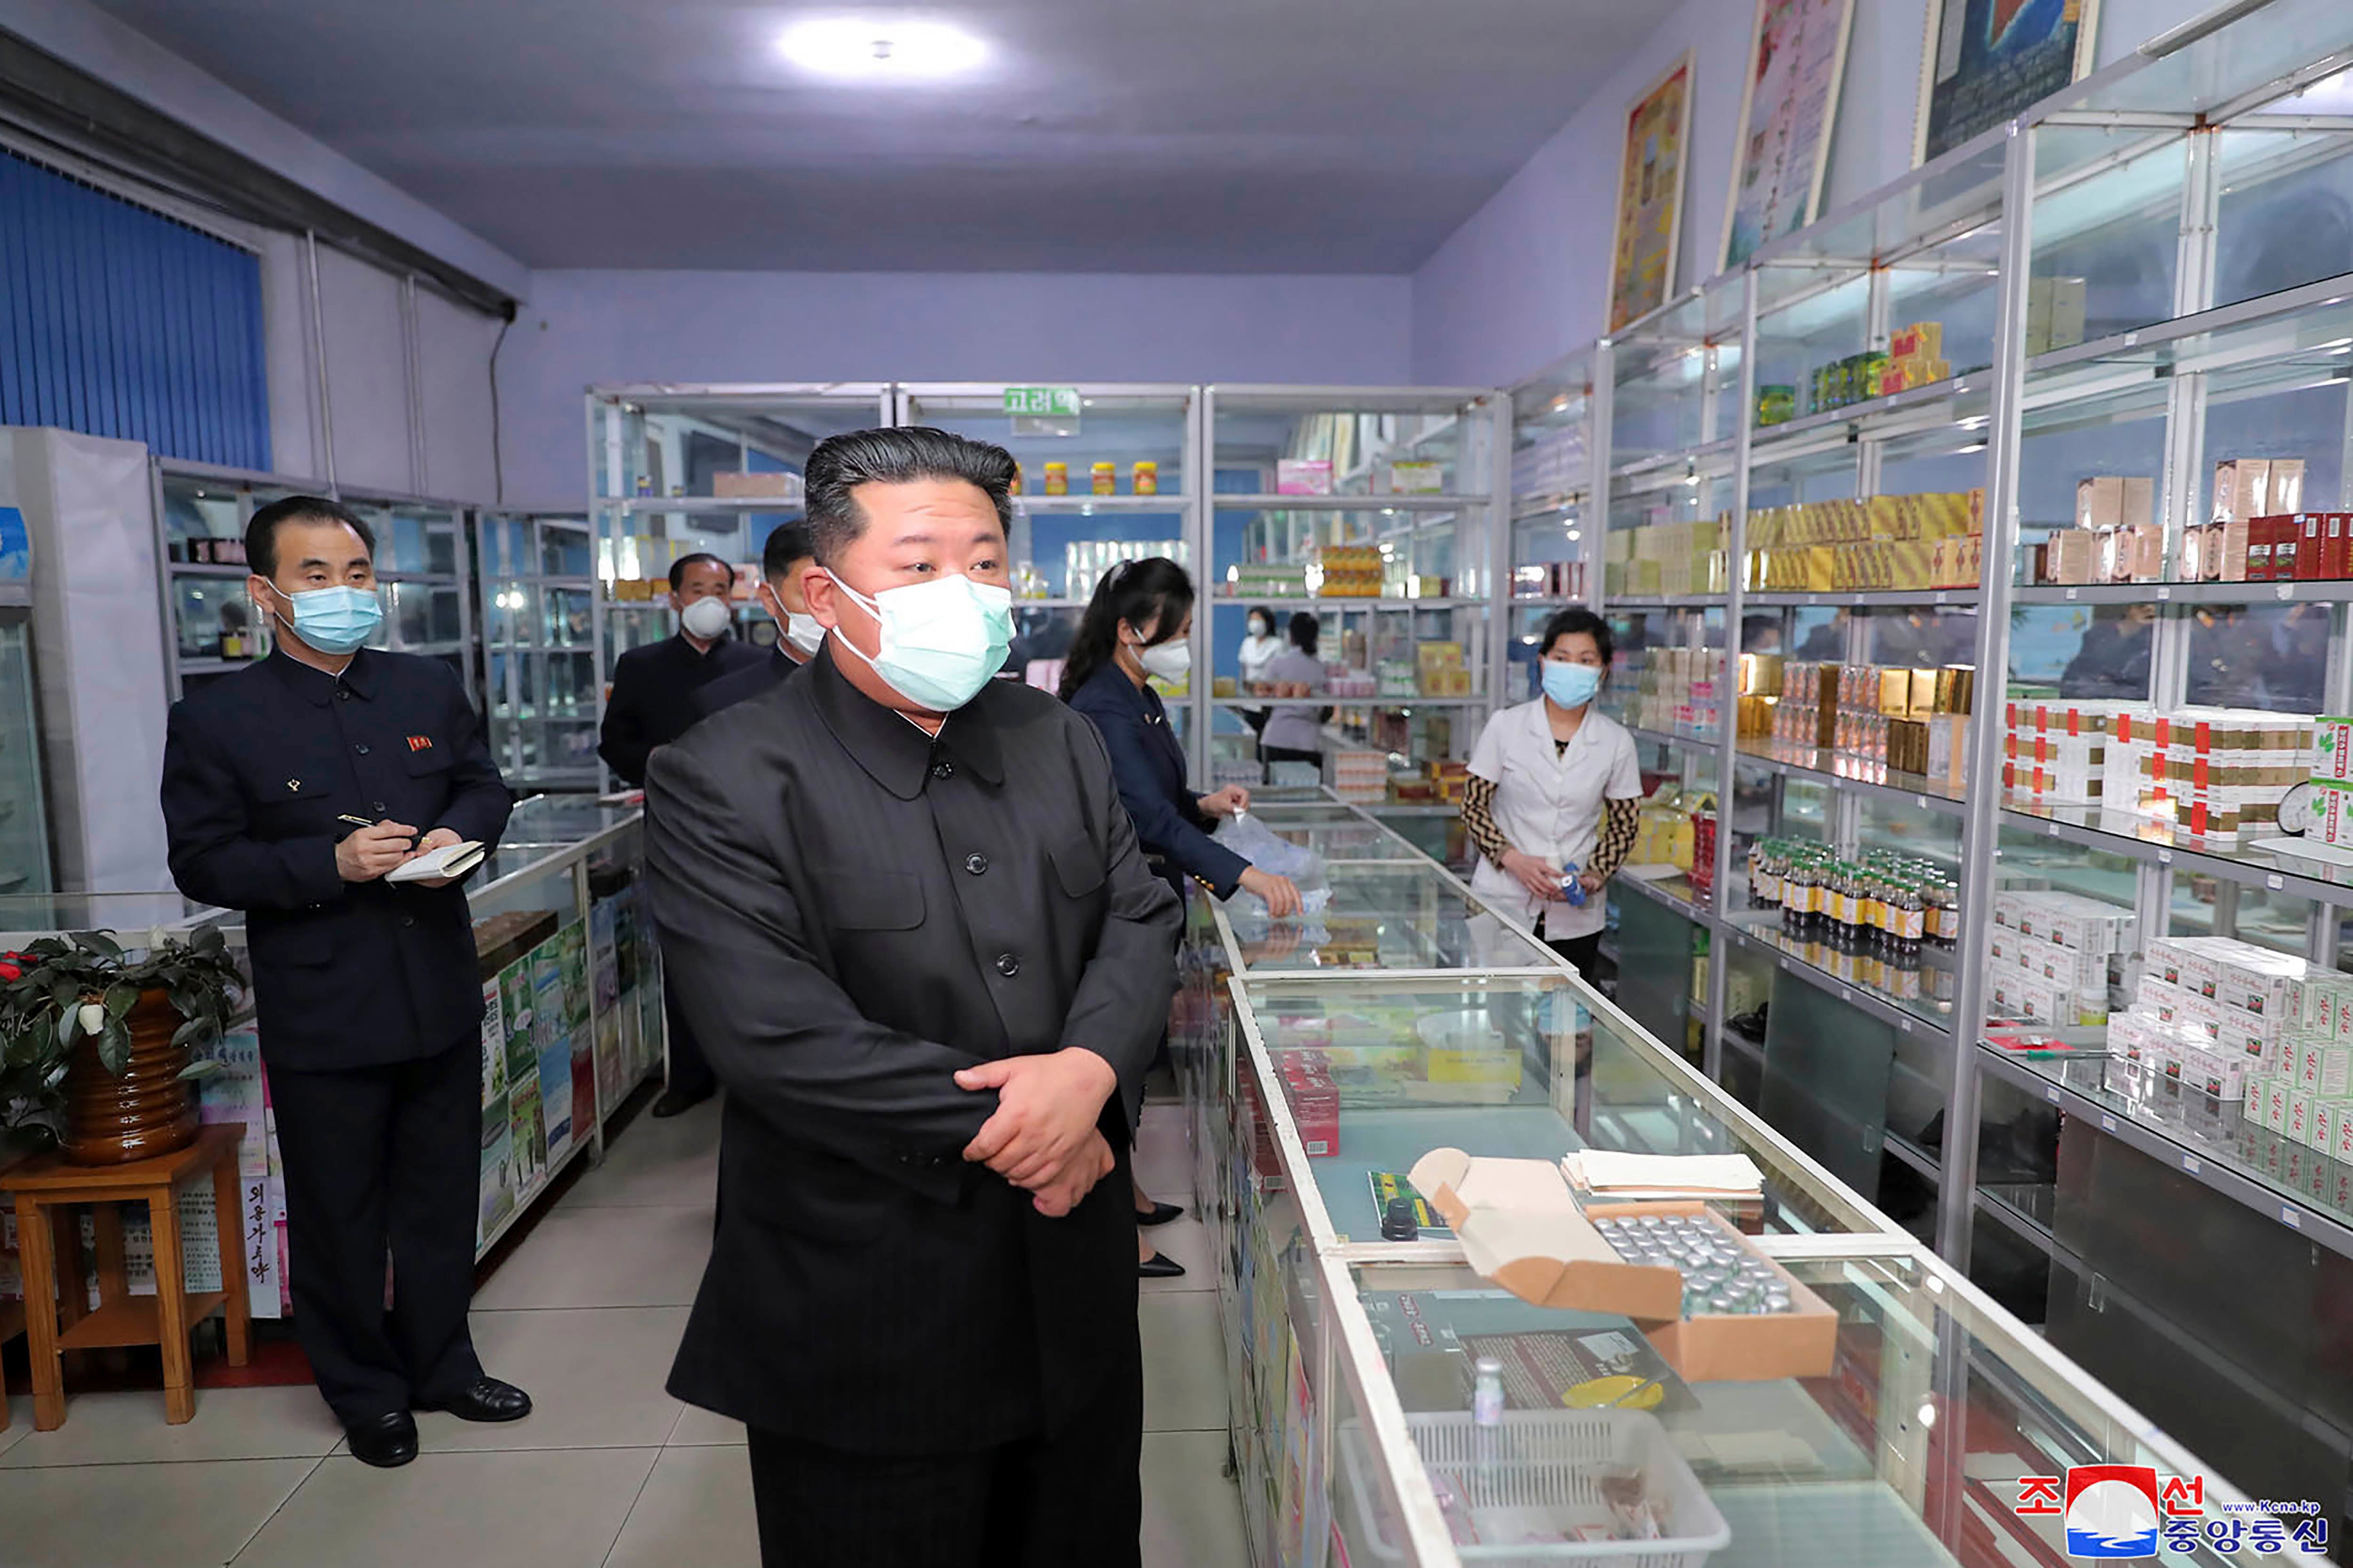 Kim Jong Un wearing a mask, during a visit to a pharmacy